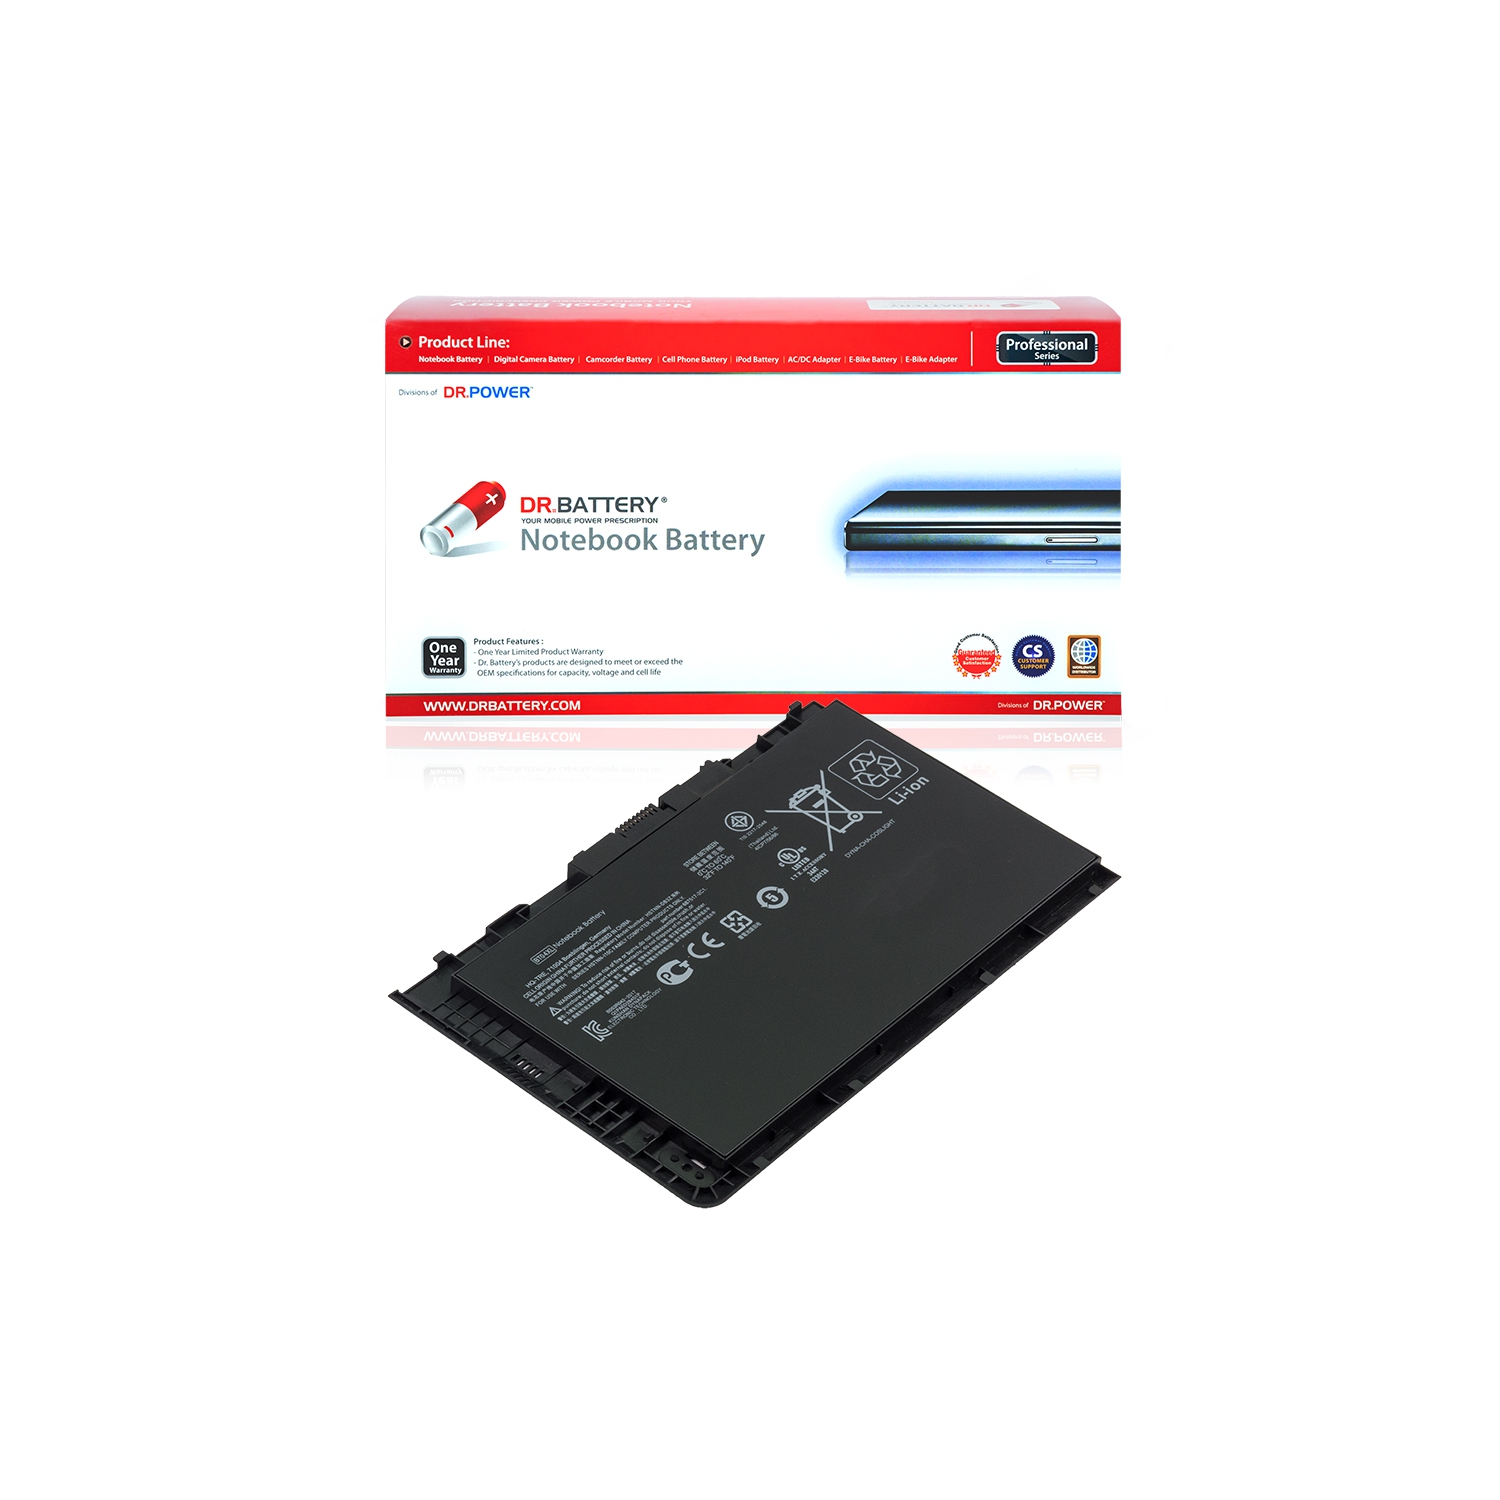 DR. BATTERY - Replacement for HP EliteBook Folio 9470m J8V40UA / 9470m P3E04UT / 9470m P3E05UT / H4Q48UT / HSTNN-DB3Z